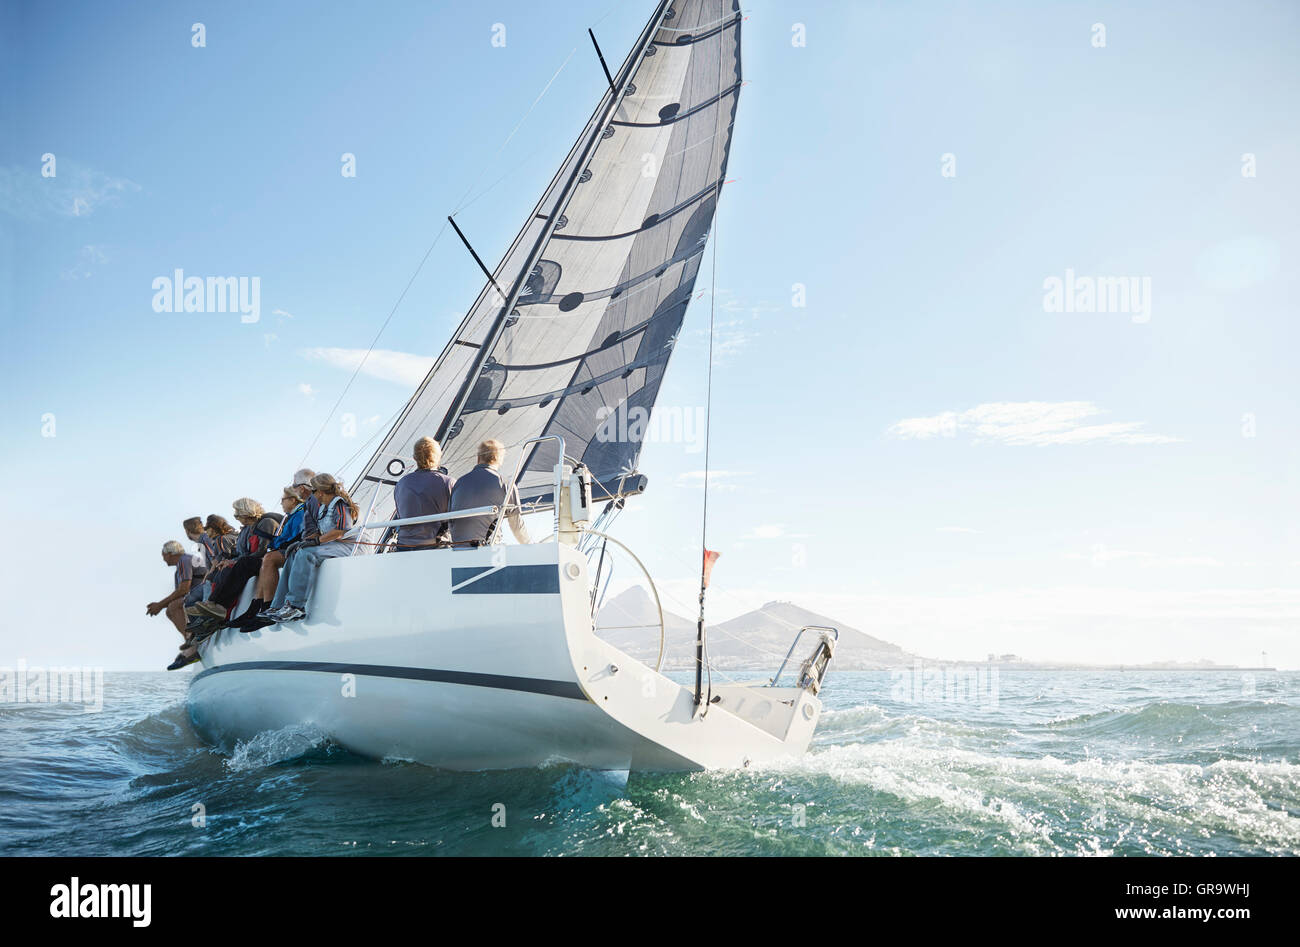 Retired friends on sailboat under blue sky Stock Photo